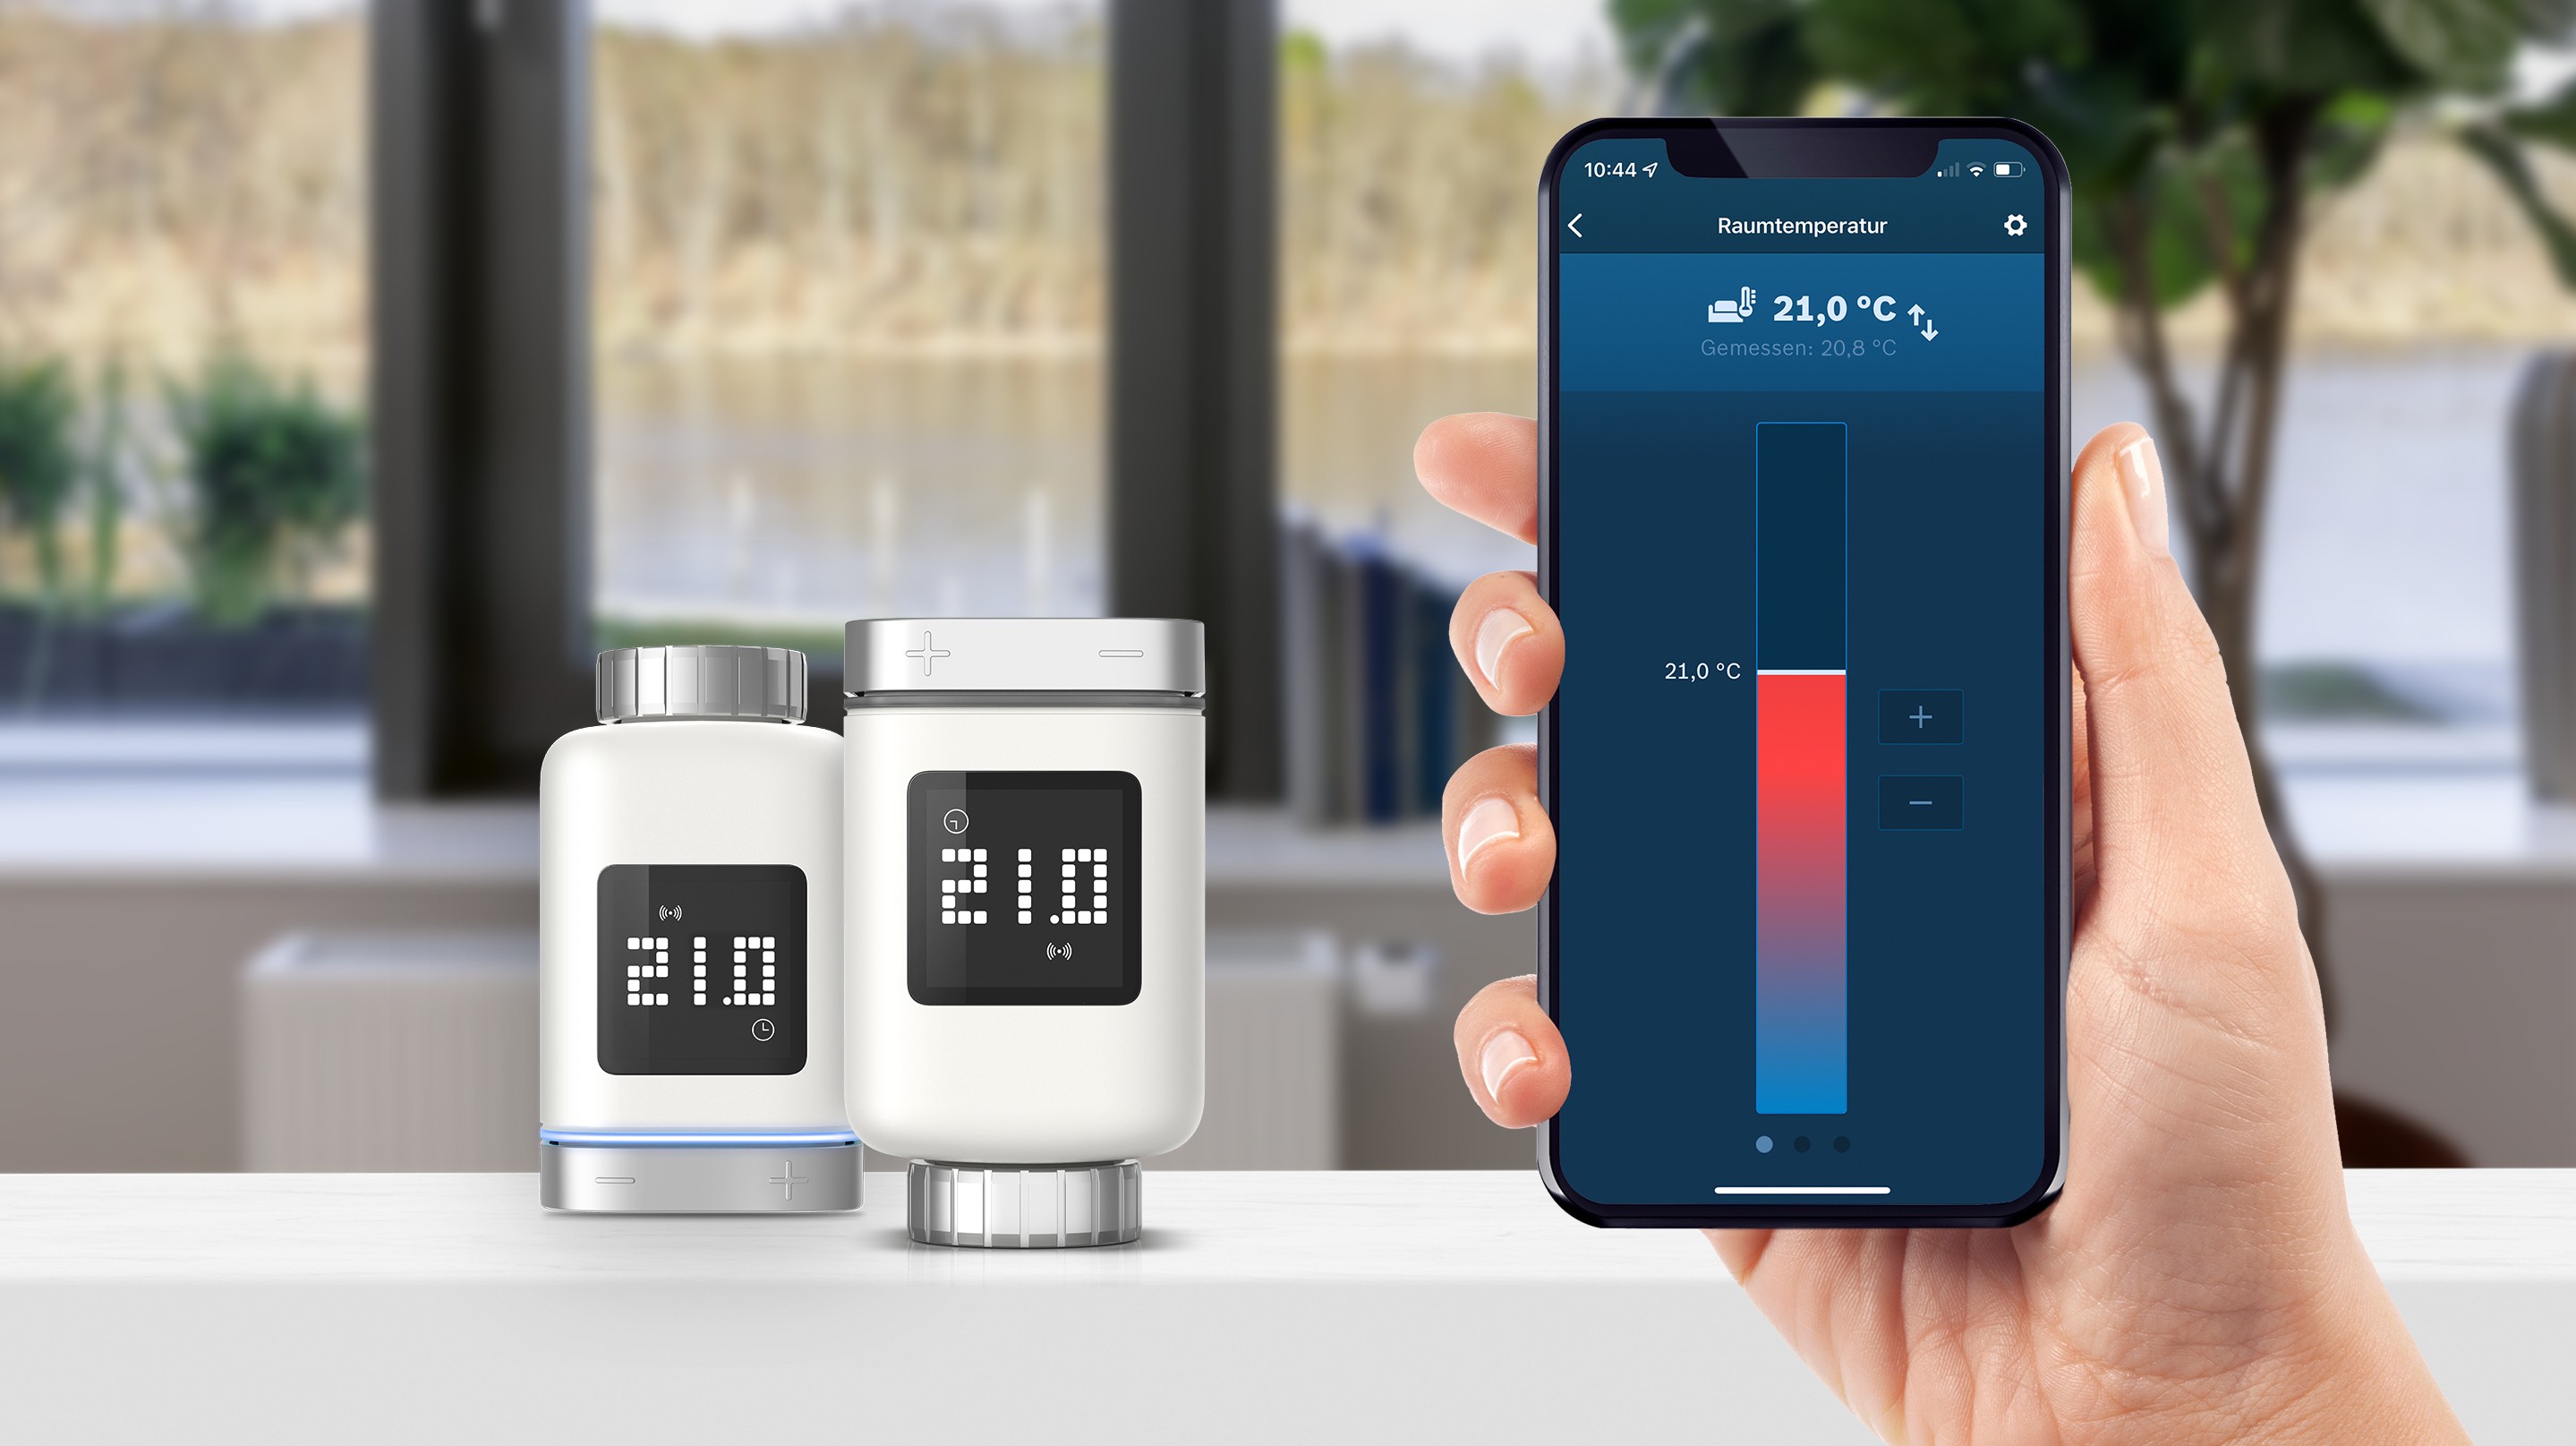 Works with, Bosch Smart Home